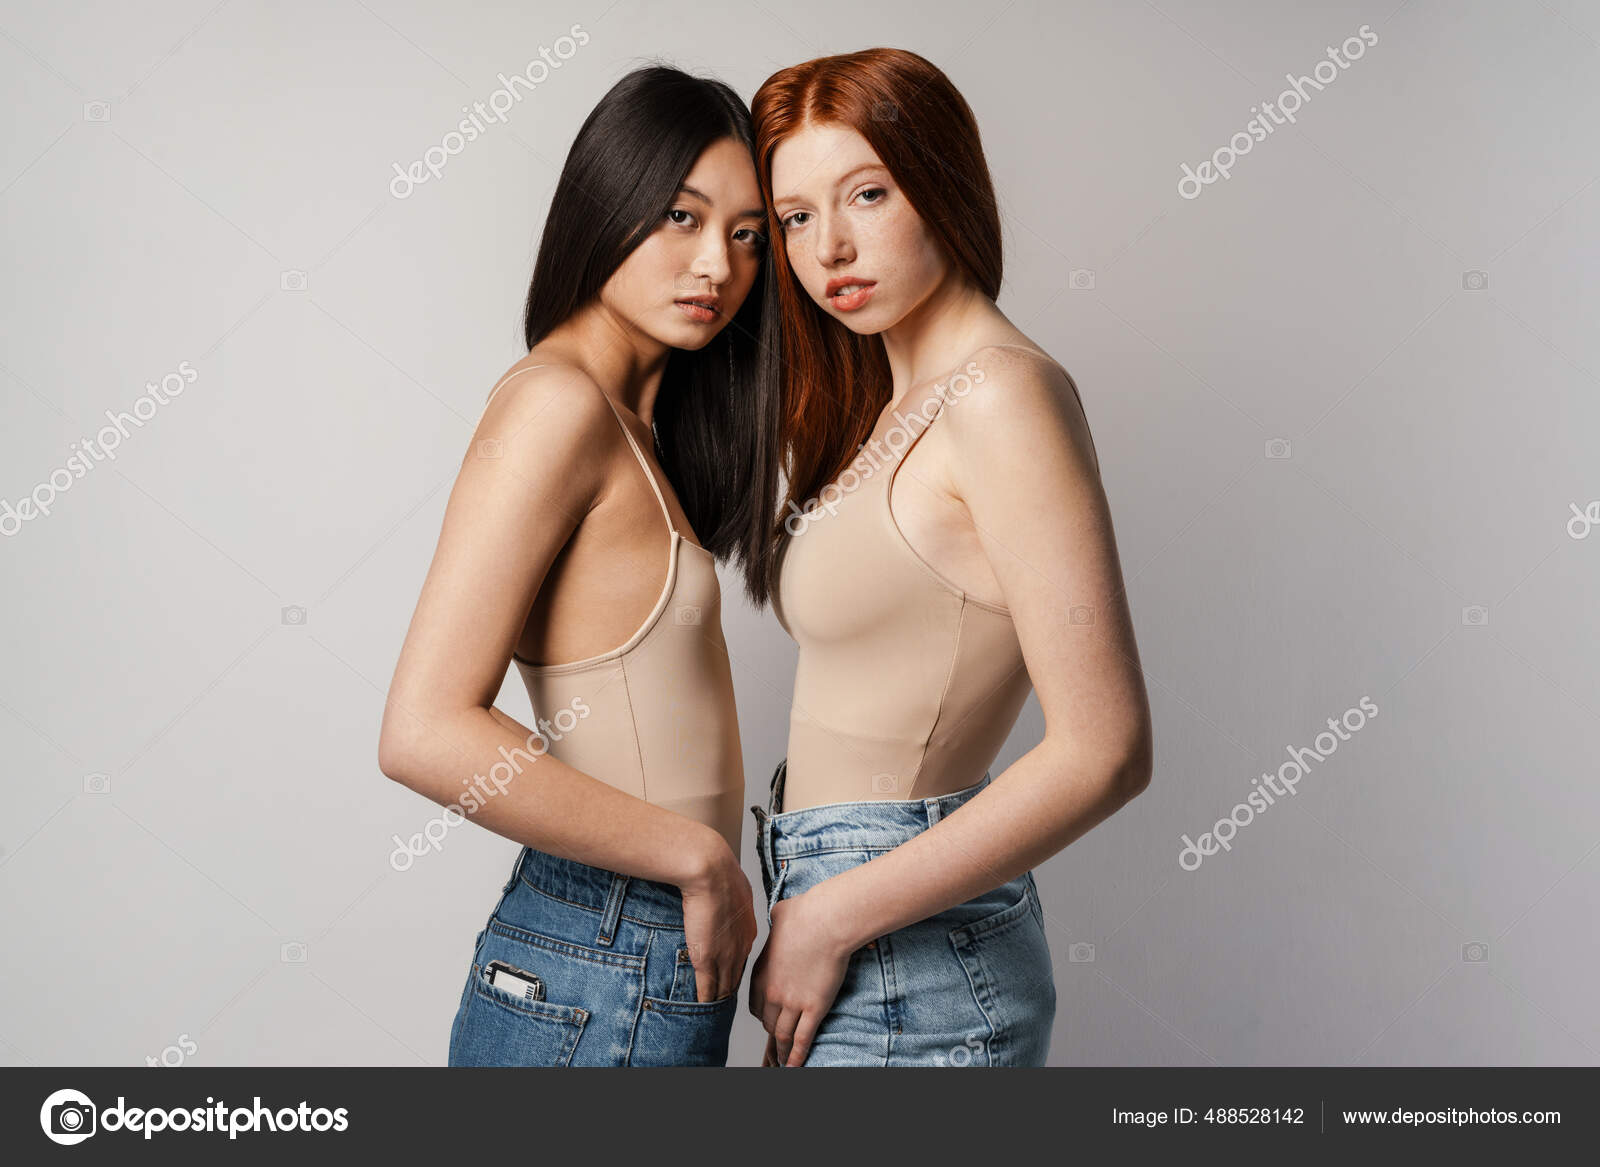 Two Women Posing In Lingerie Stock Photo, Picture and Royalty Free Image.  Image 38179427.